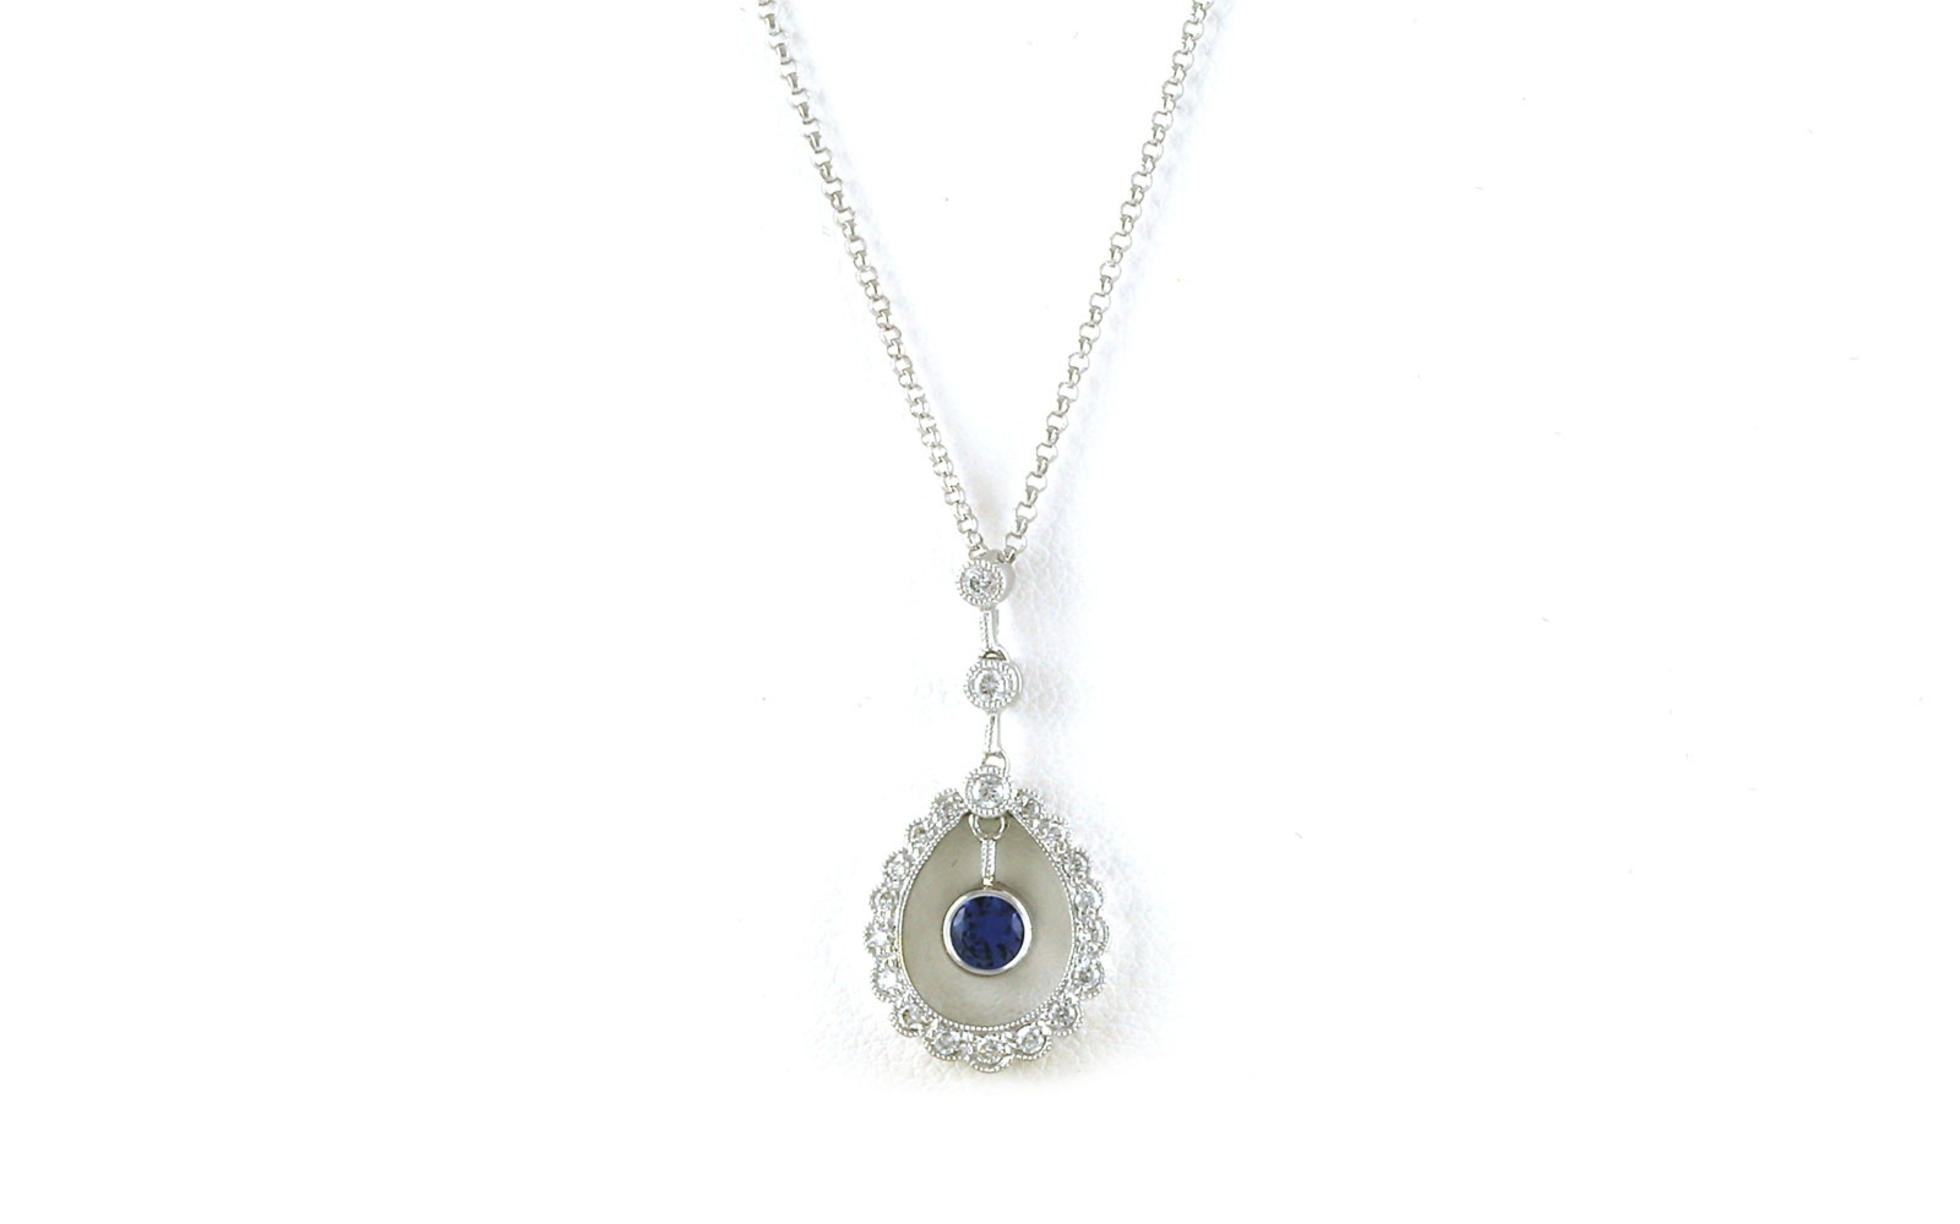 Vintage-style Teardrop Dangle Montana Yogo Sapphire and Diamond Necklace in White Gold (0.50cts TWT)